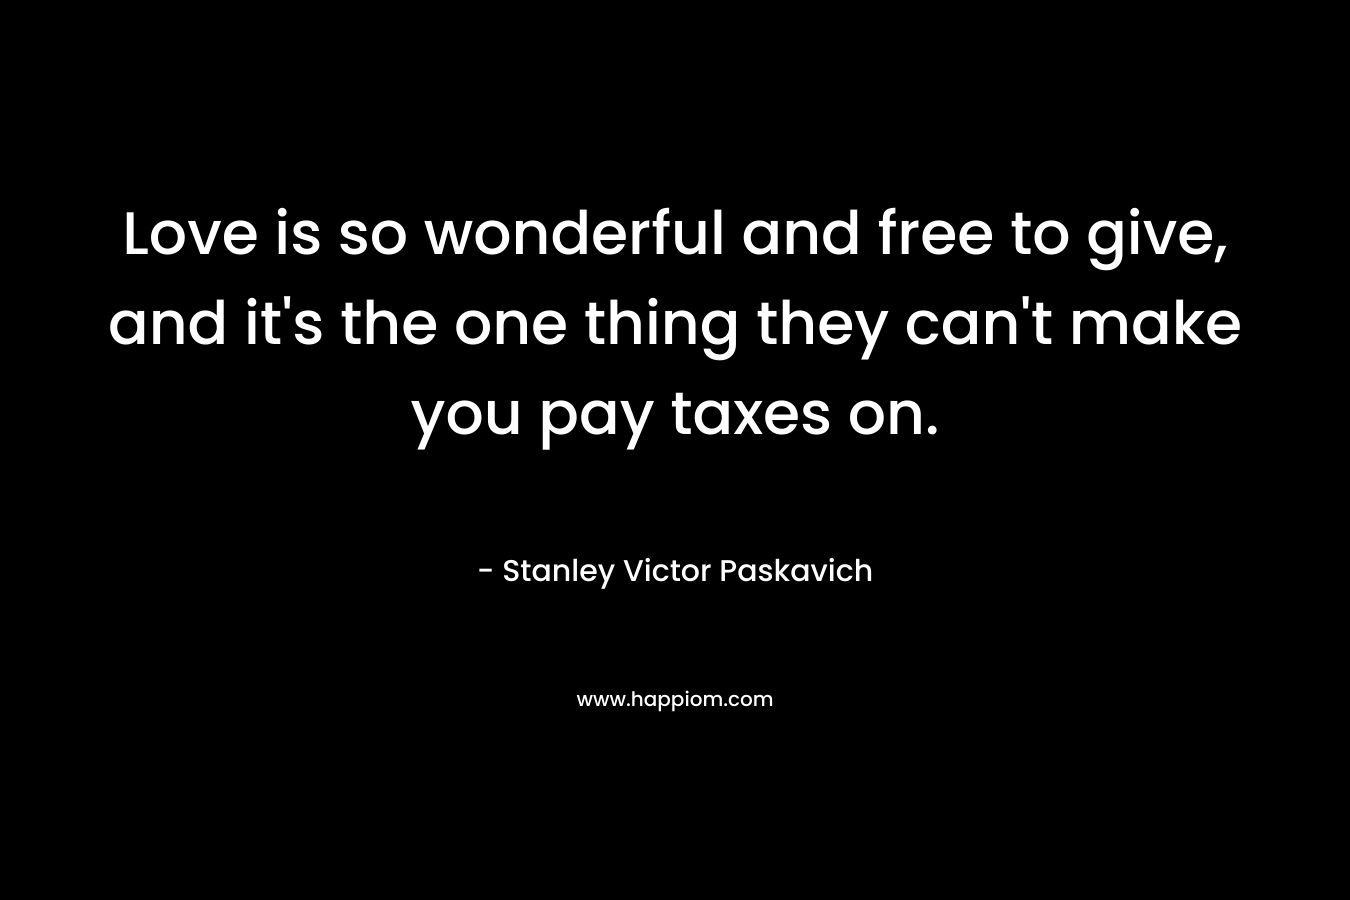 Love is so wonderful and free to give, and it's the one thing they can't make you pay taxes on.